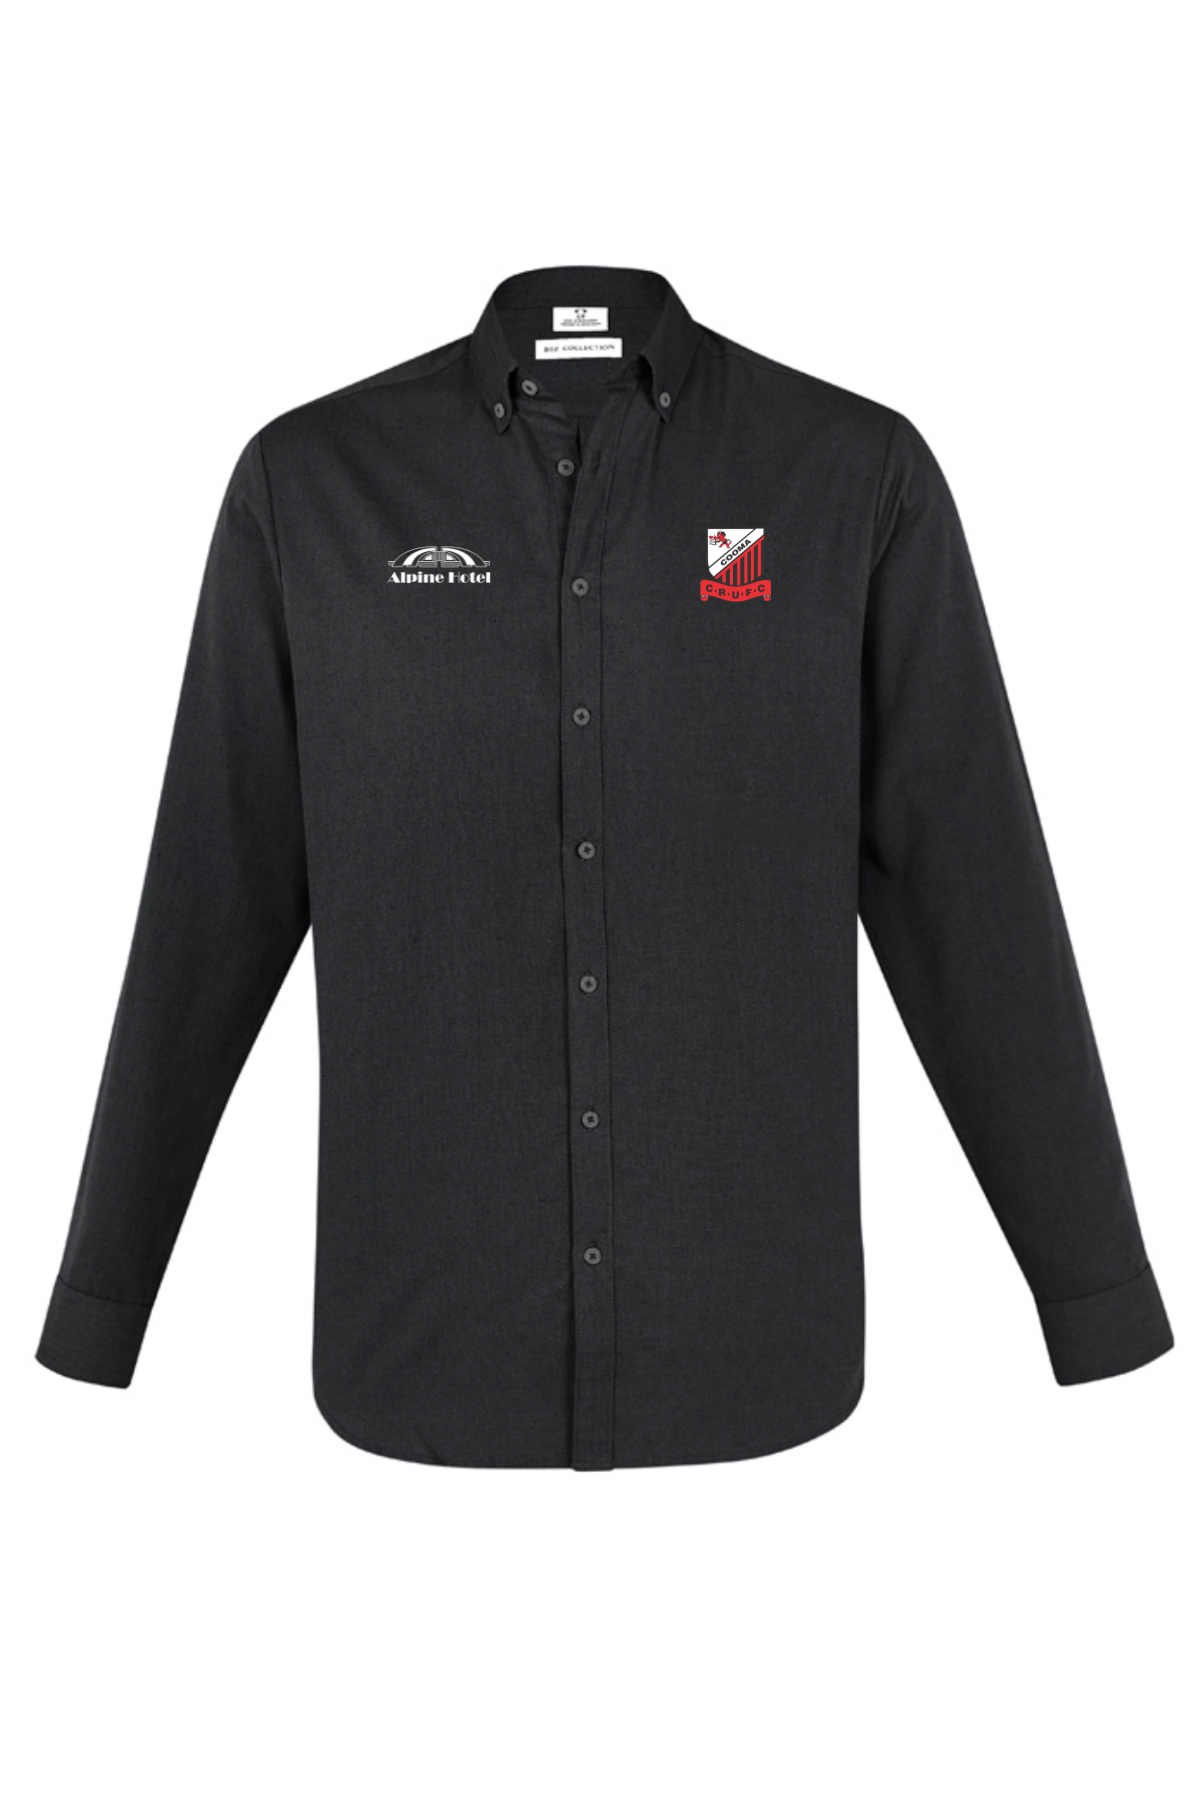 Cooma Rugby Red Devils Players Dress Shirt